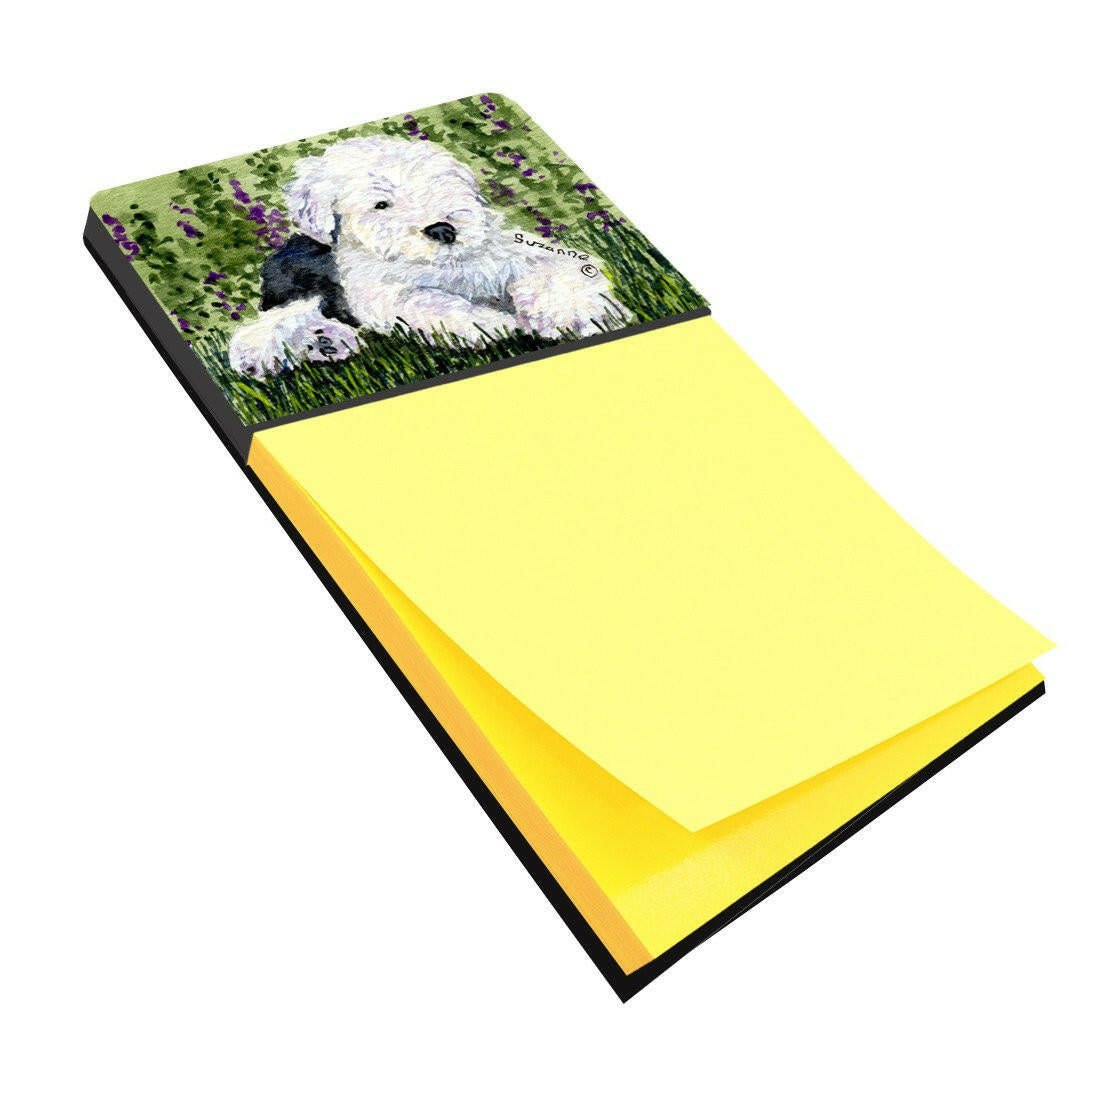 Old English Sheepdog Refiillable Sticky Note Holder or Postit Note Dispenser SS8840SN by Caroline's Treasures